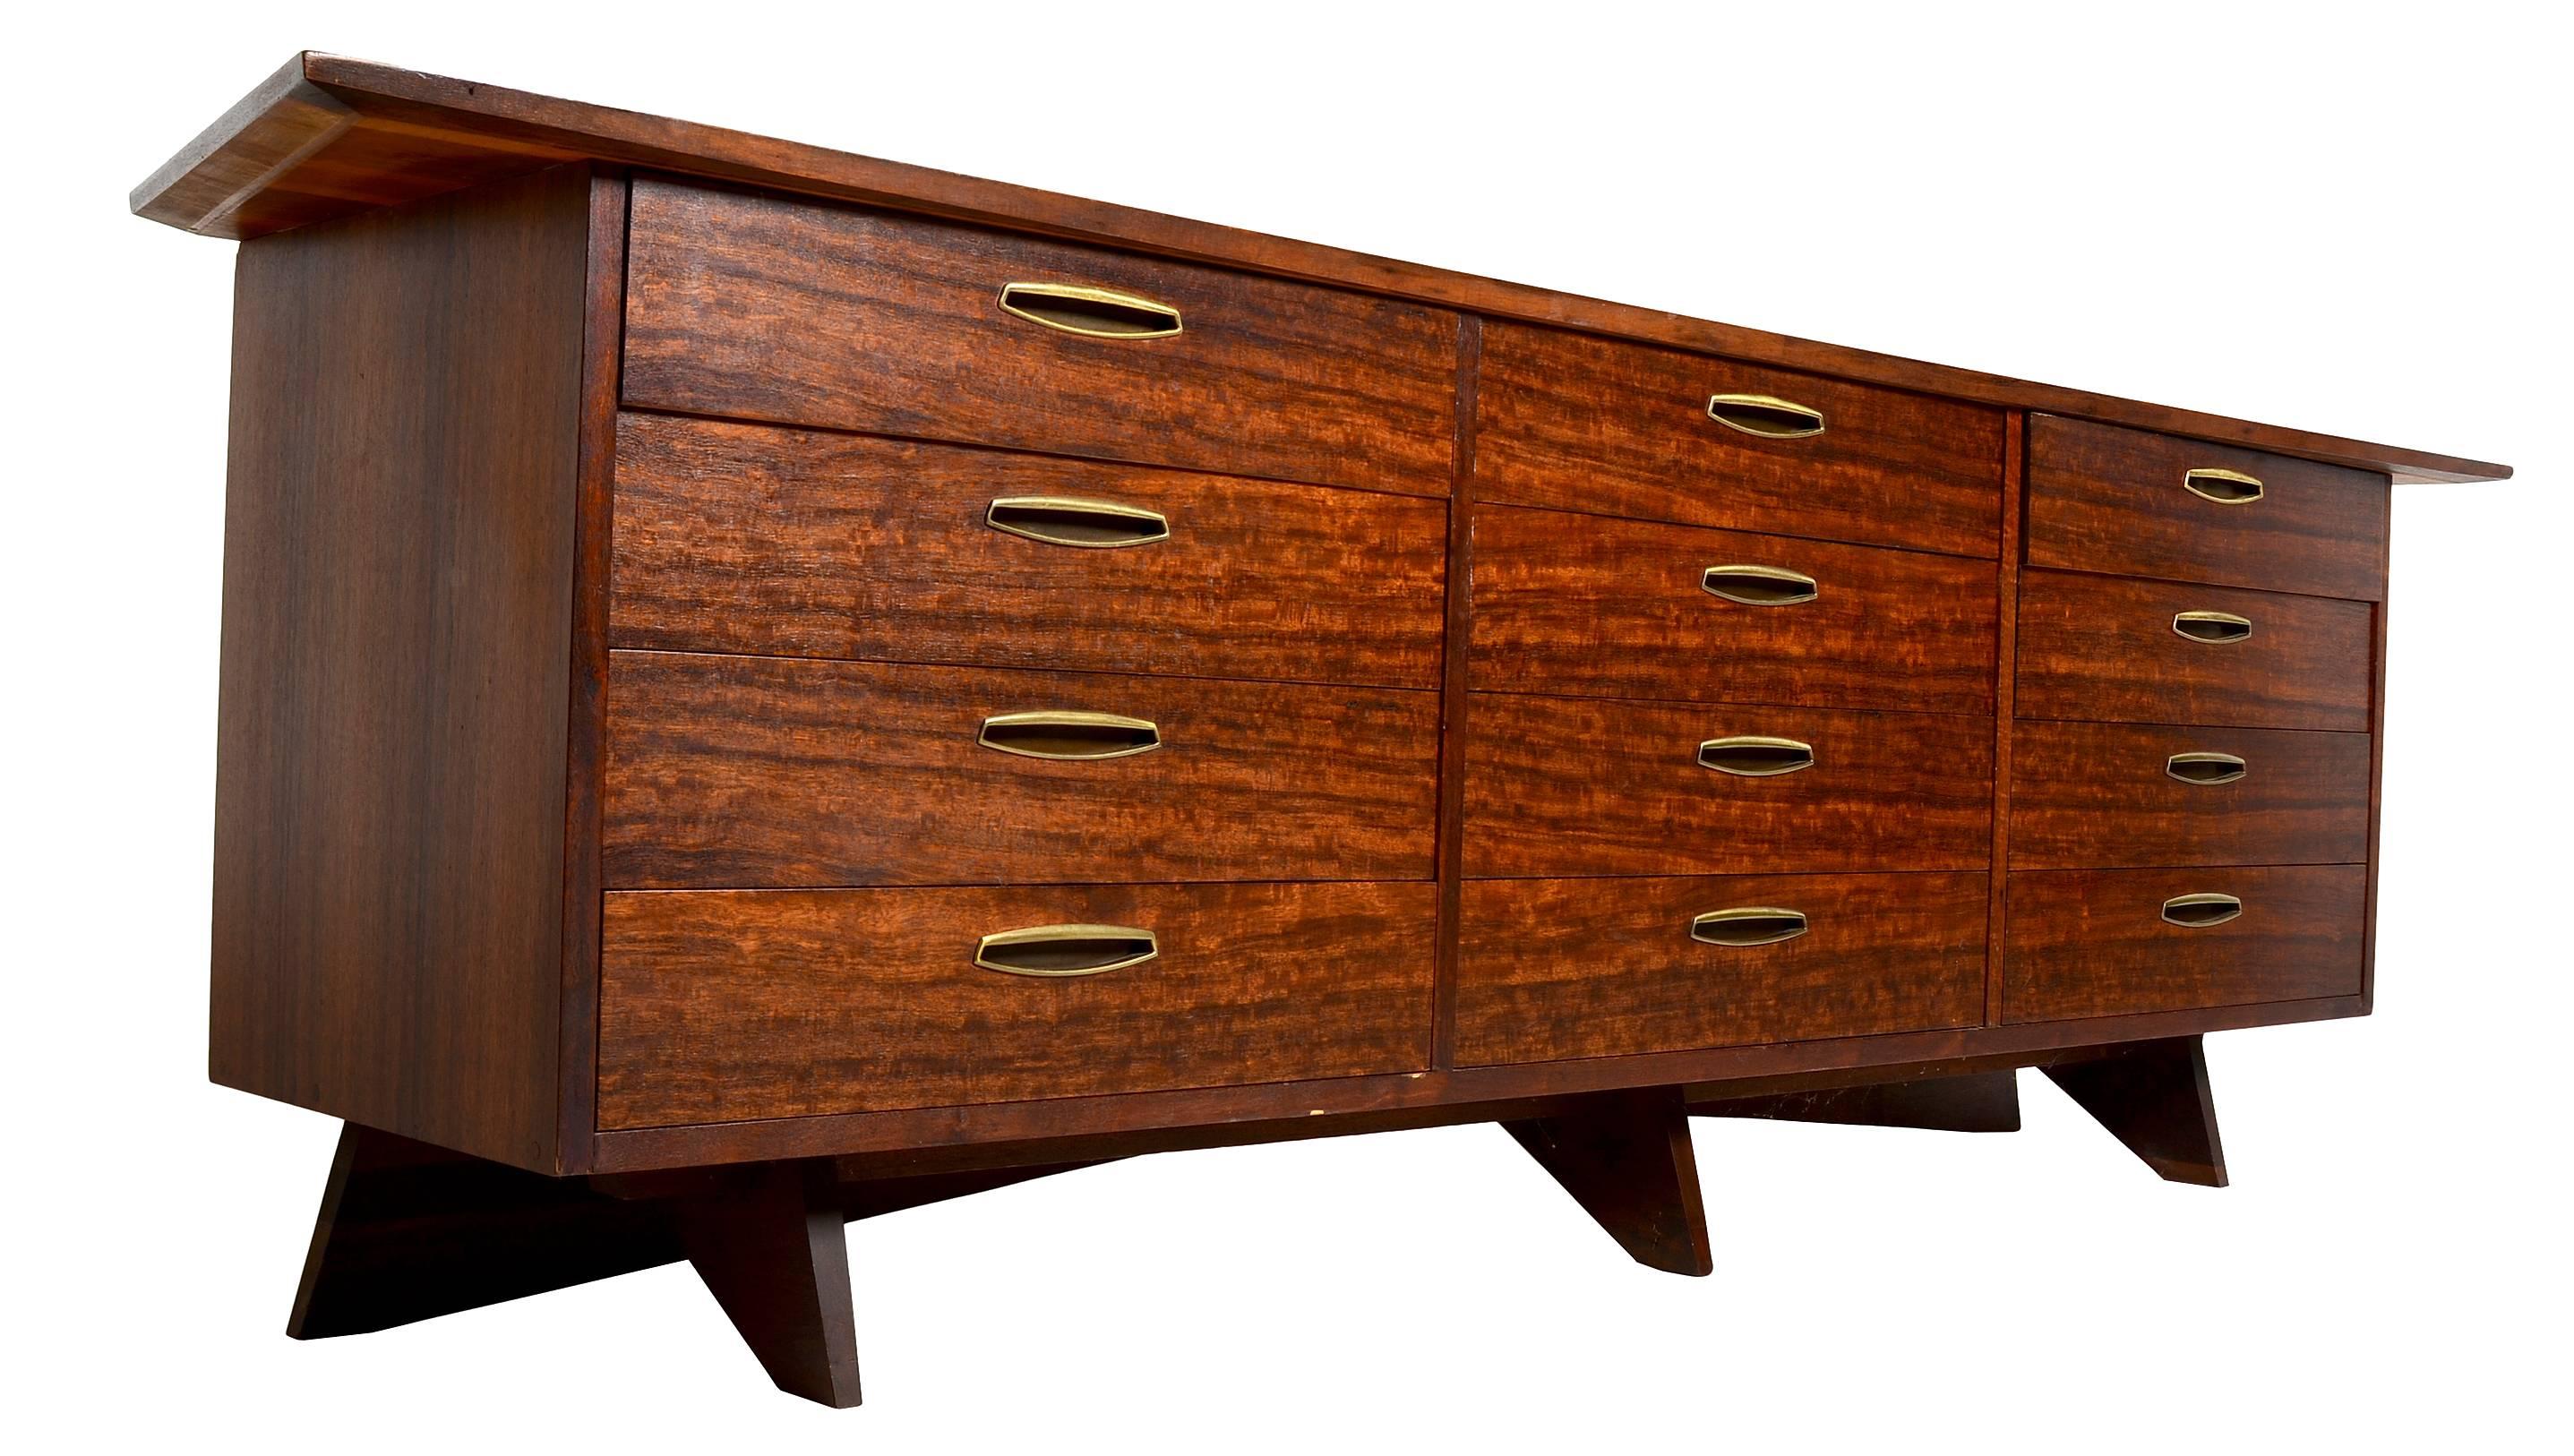 A splendid example of the iconic origins series chest of drawers by George Nakashima for Widdicomb.